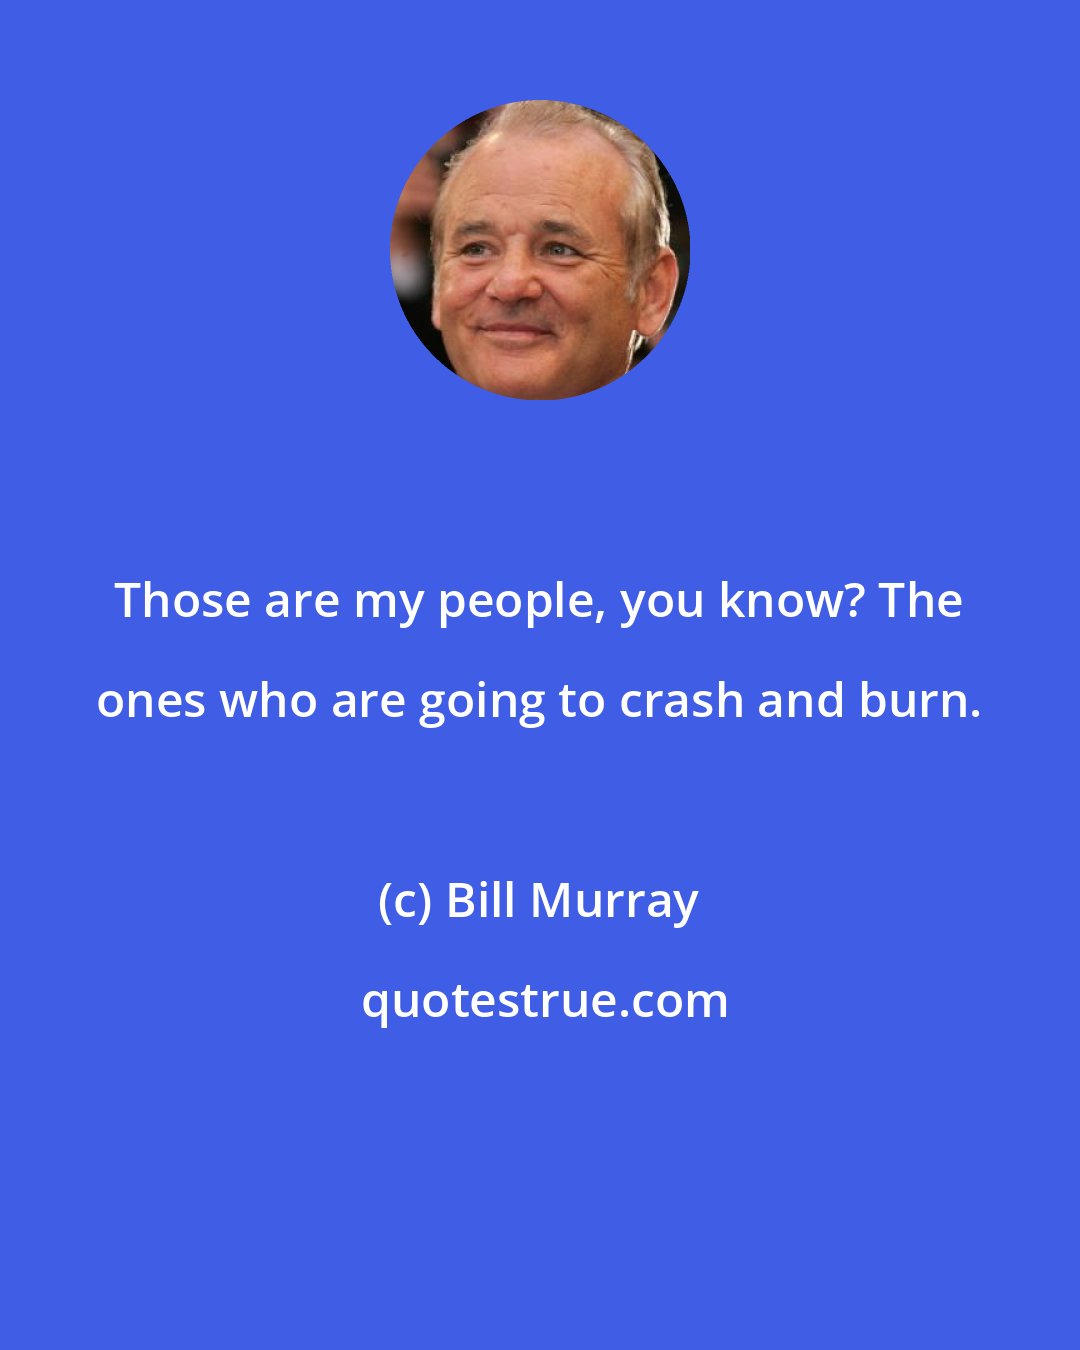 Bill Murray: Those are my people, you know? The ones who are going to crash and burn.